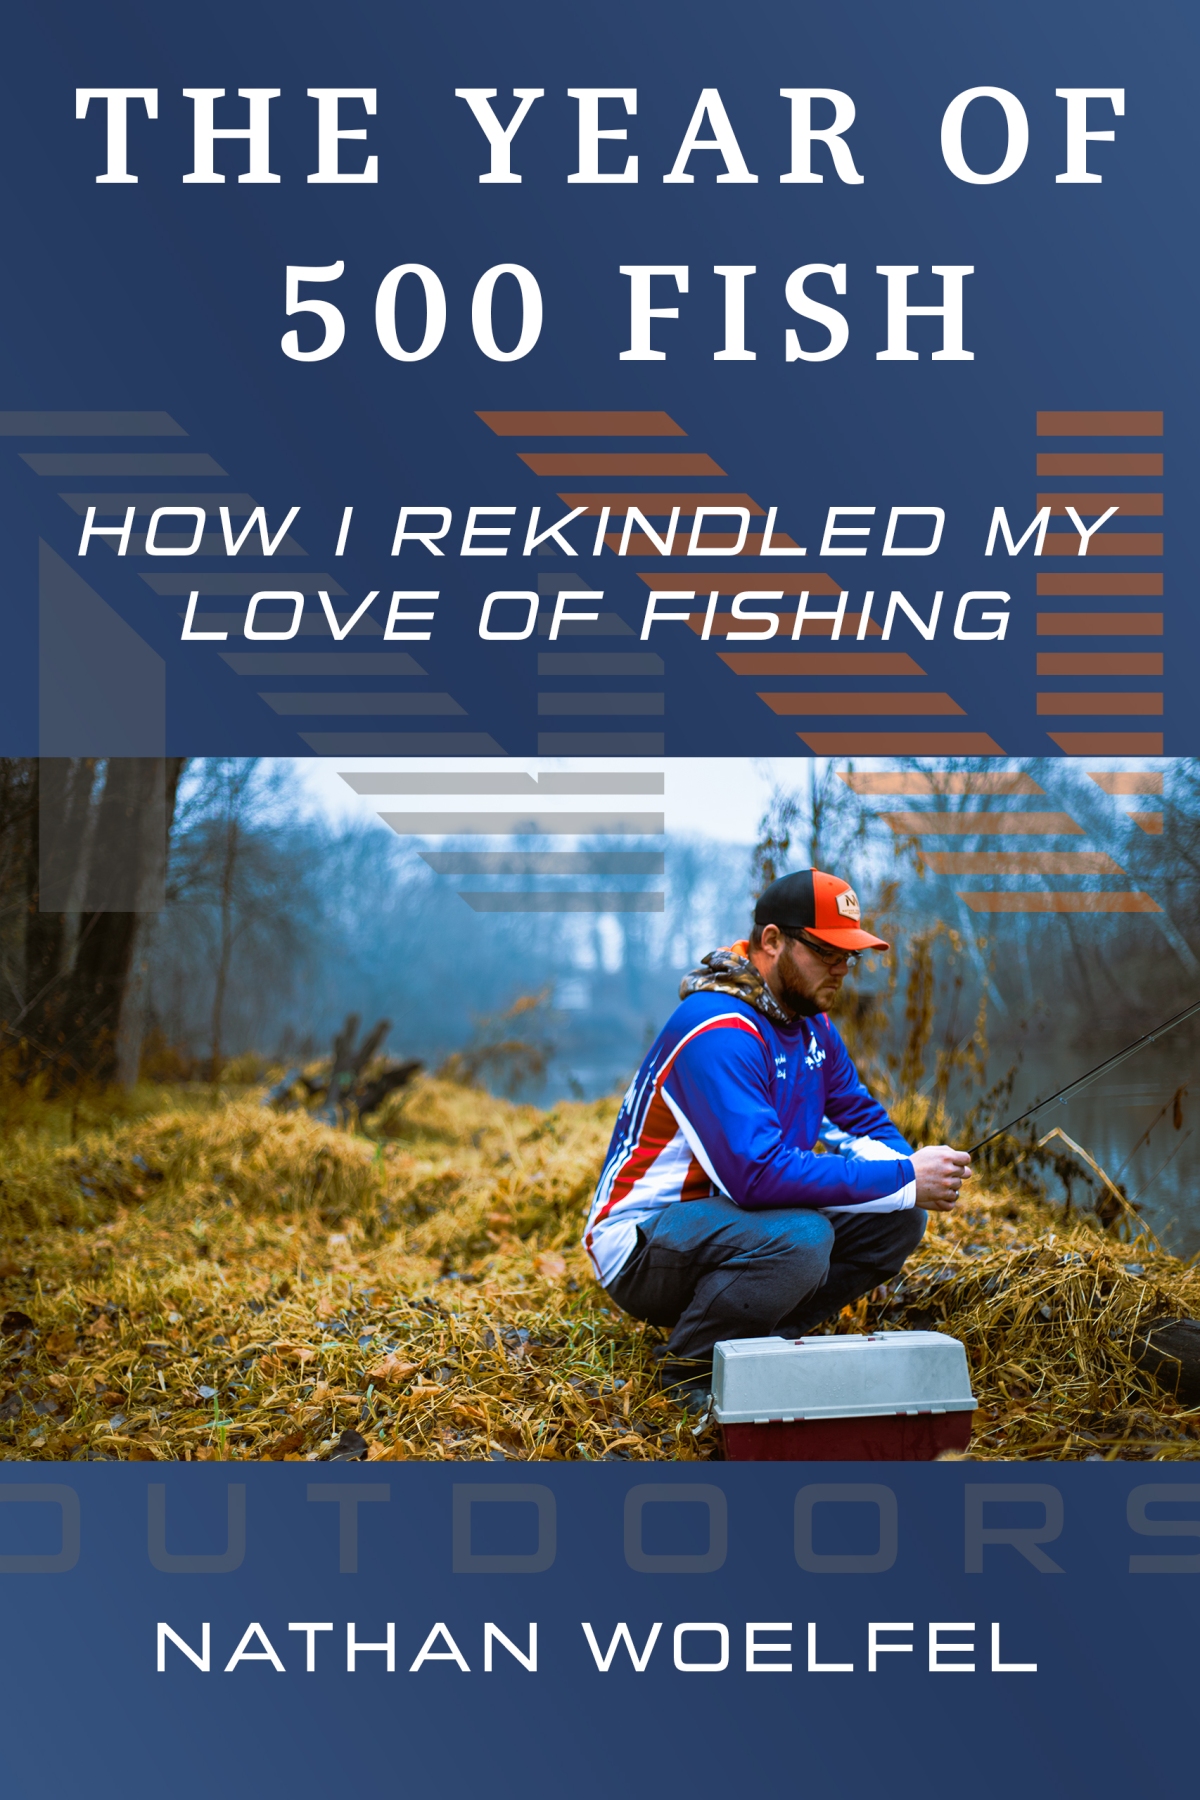 “The Year of 500 Fish” ebook is now available